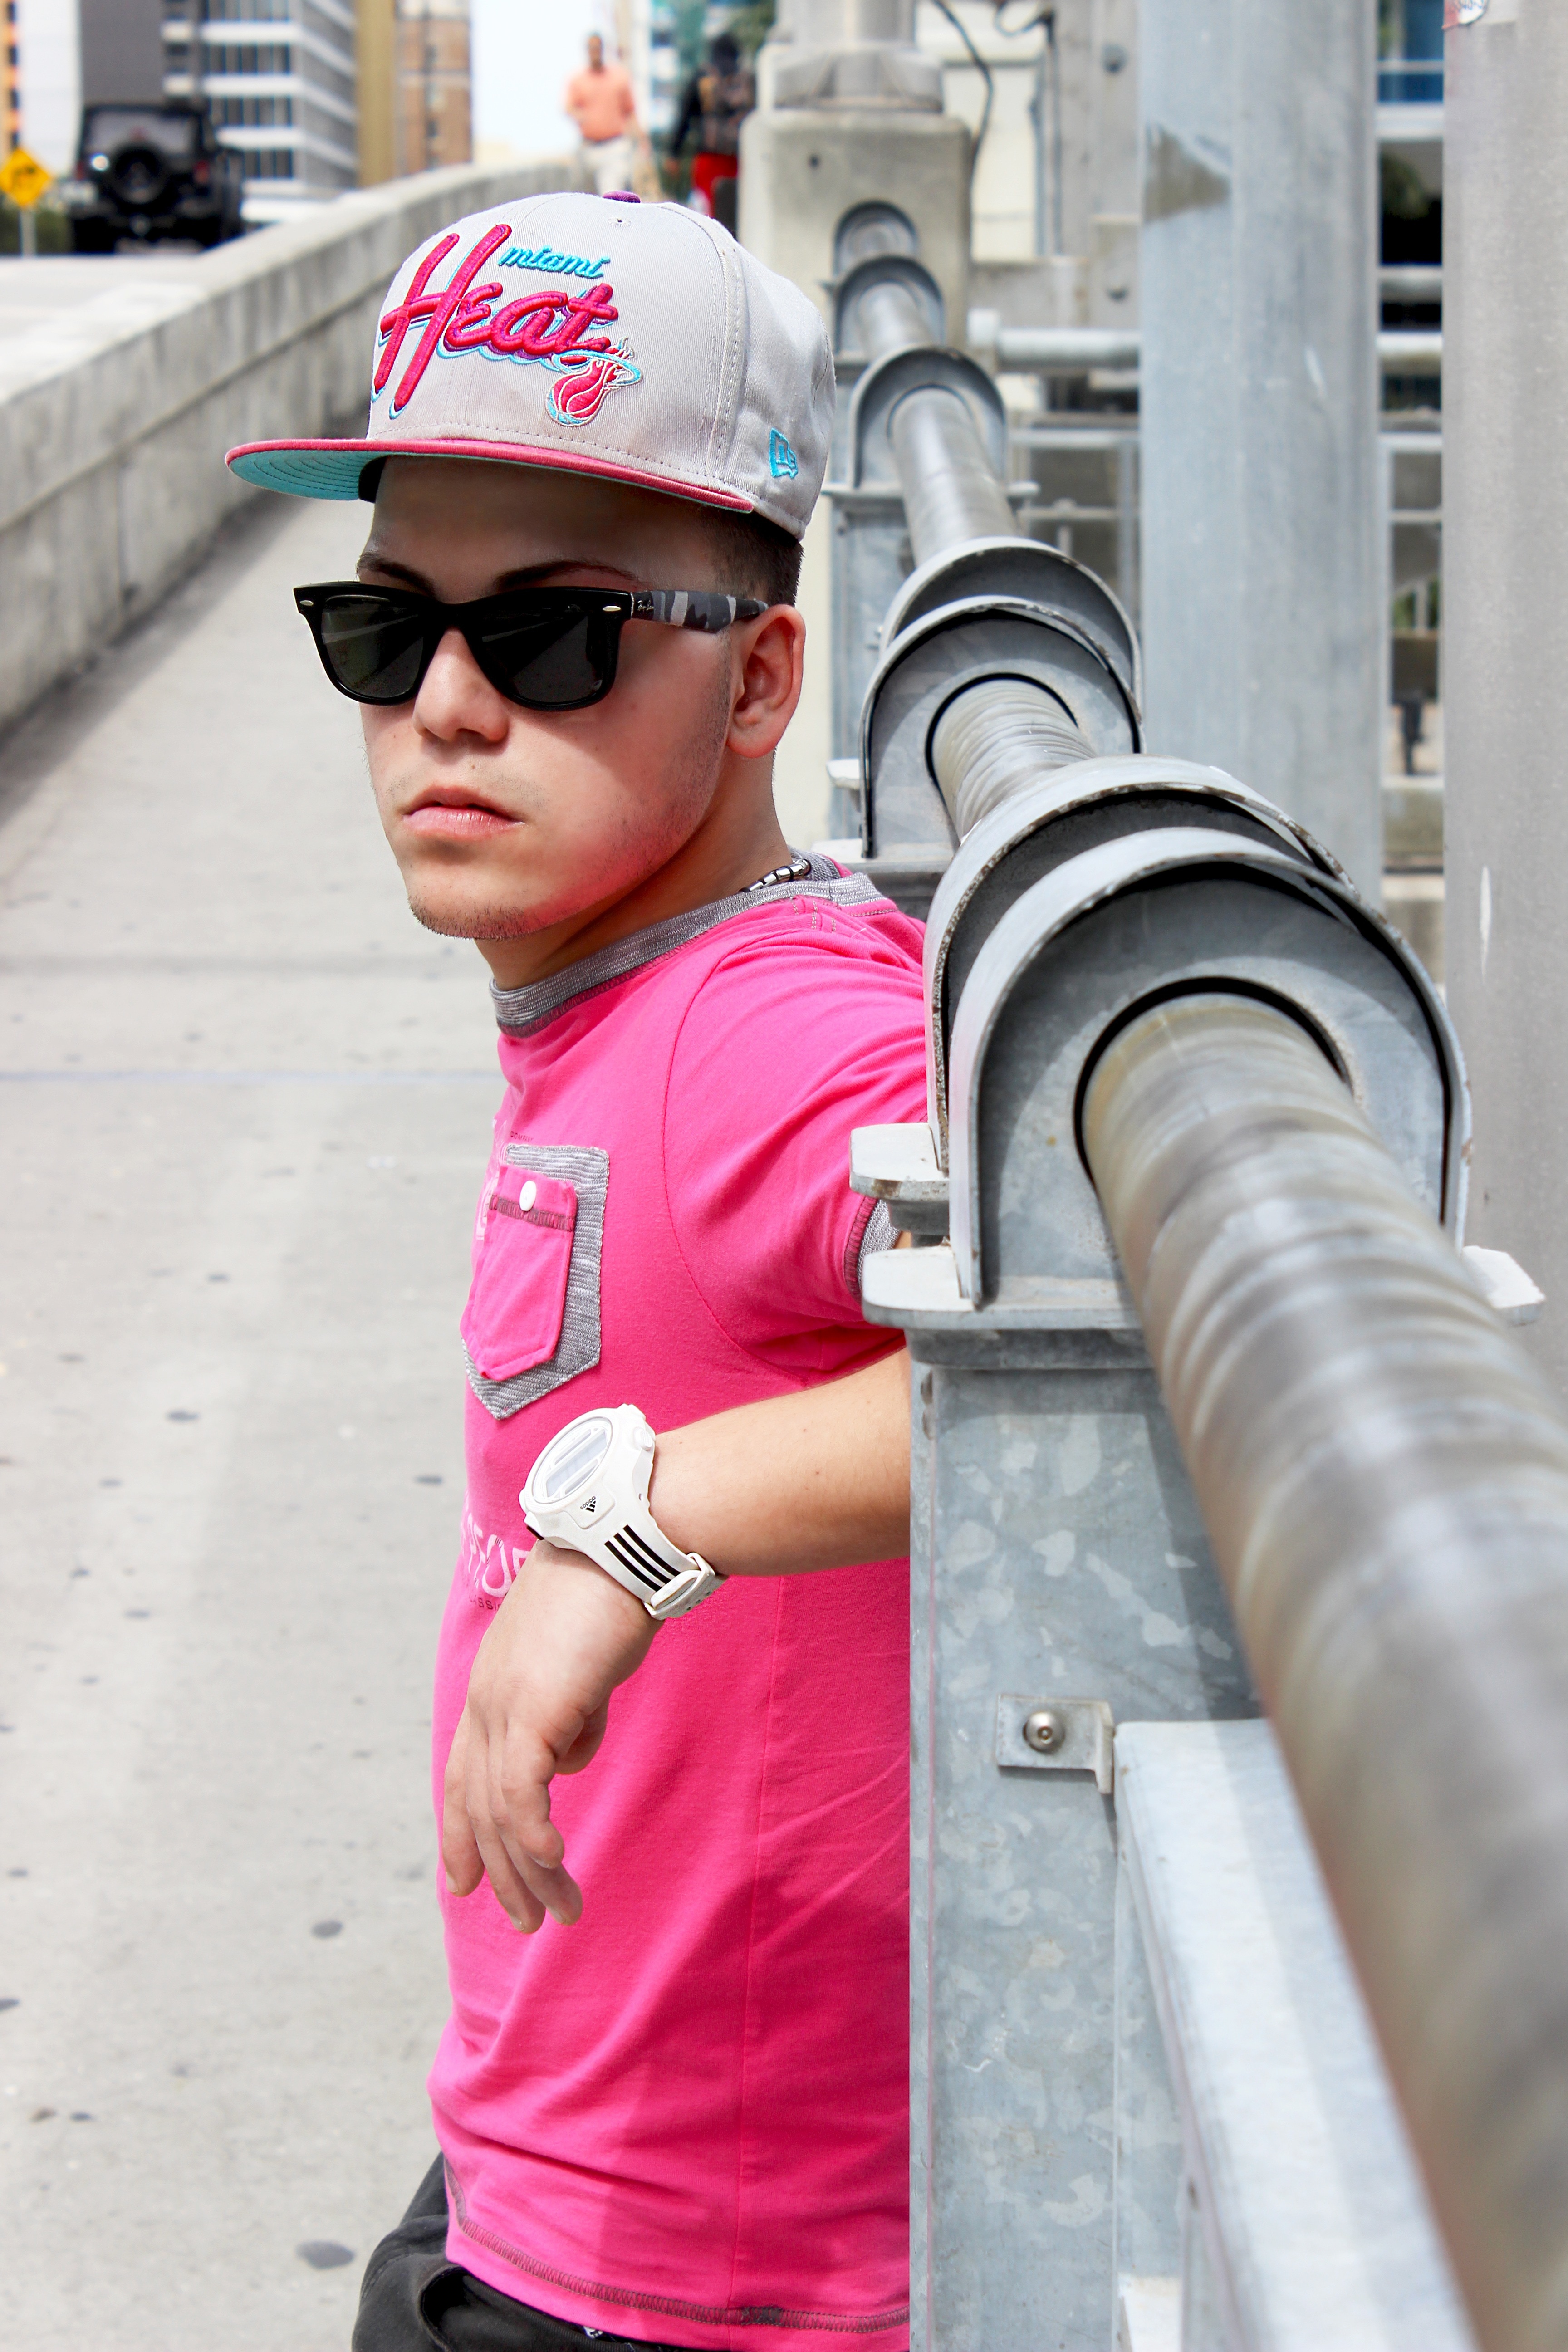 men's white and pink fitted cap,pink crew neck t shirt and white round watch